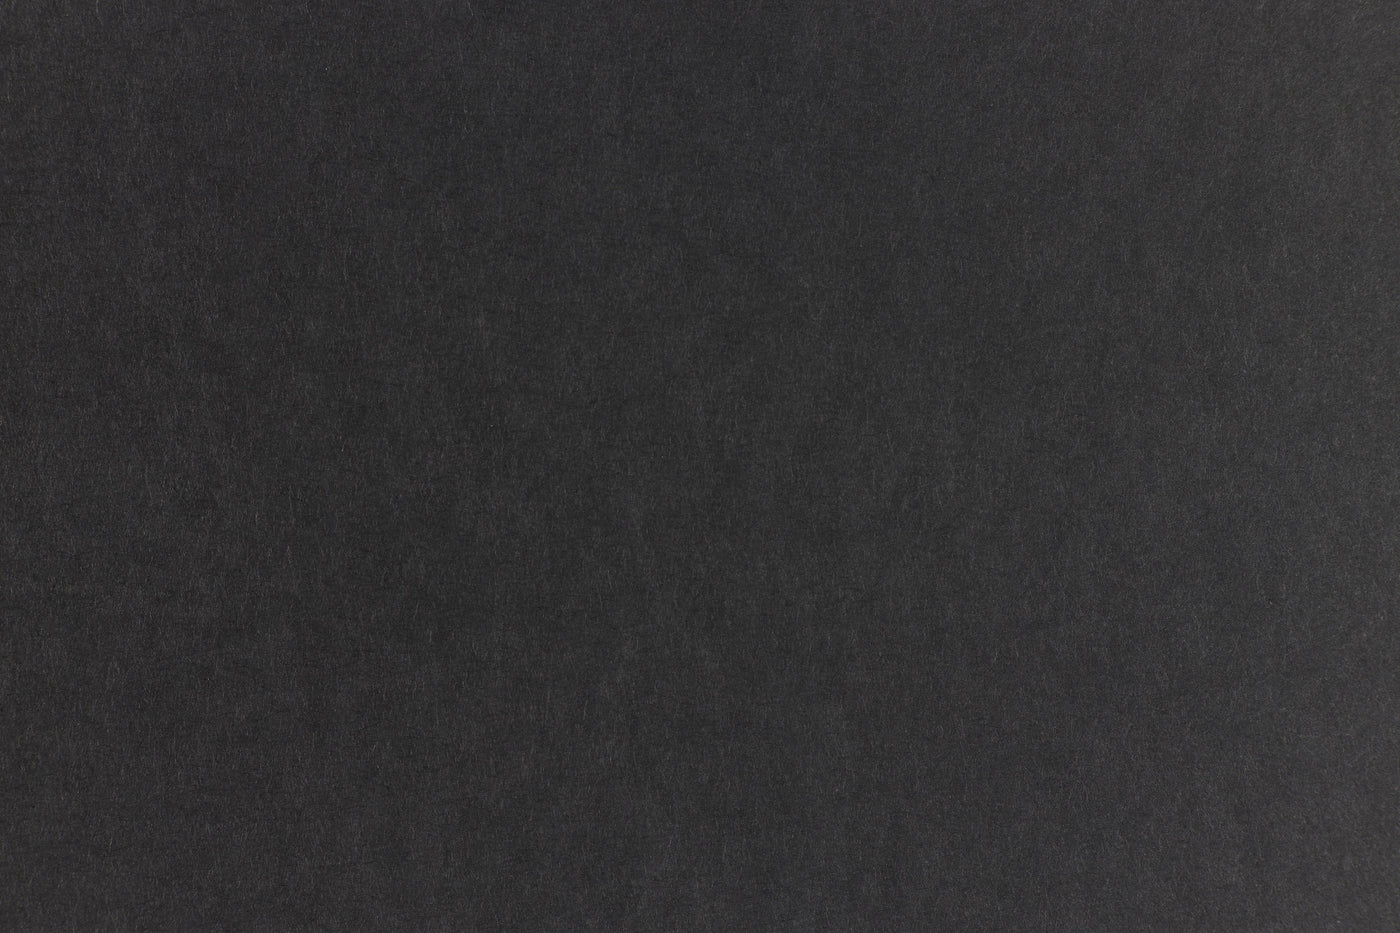 Black Cardstock (Muscletone, Cover Weight)